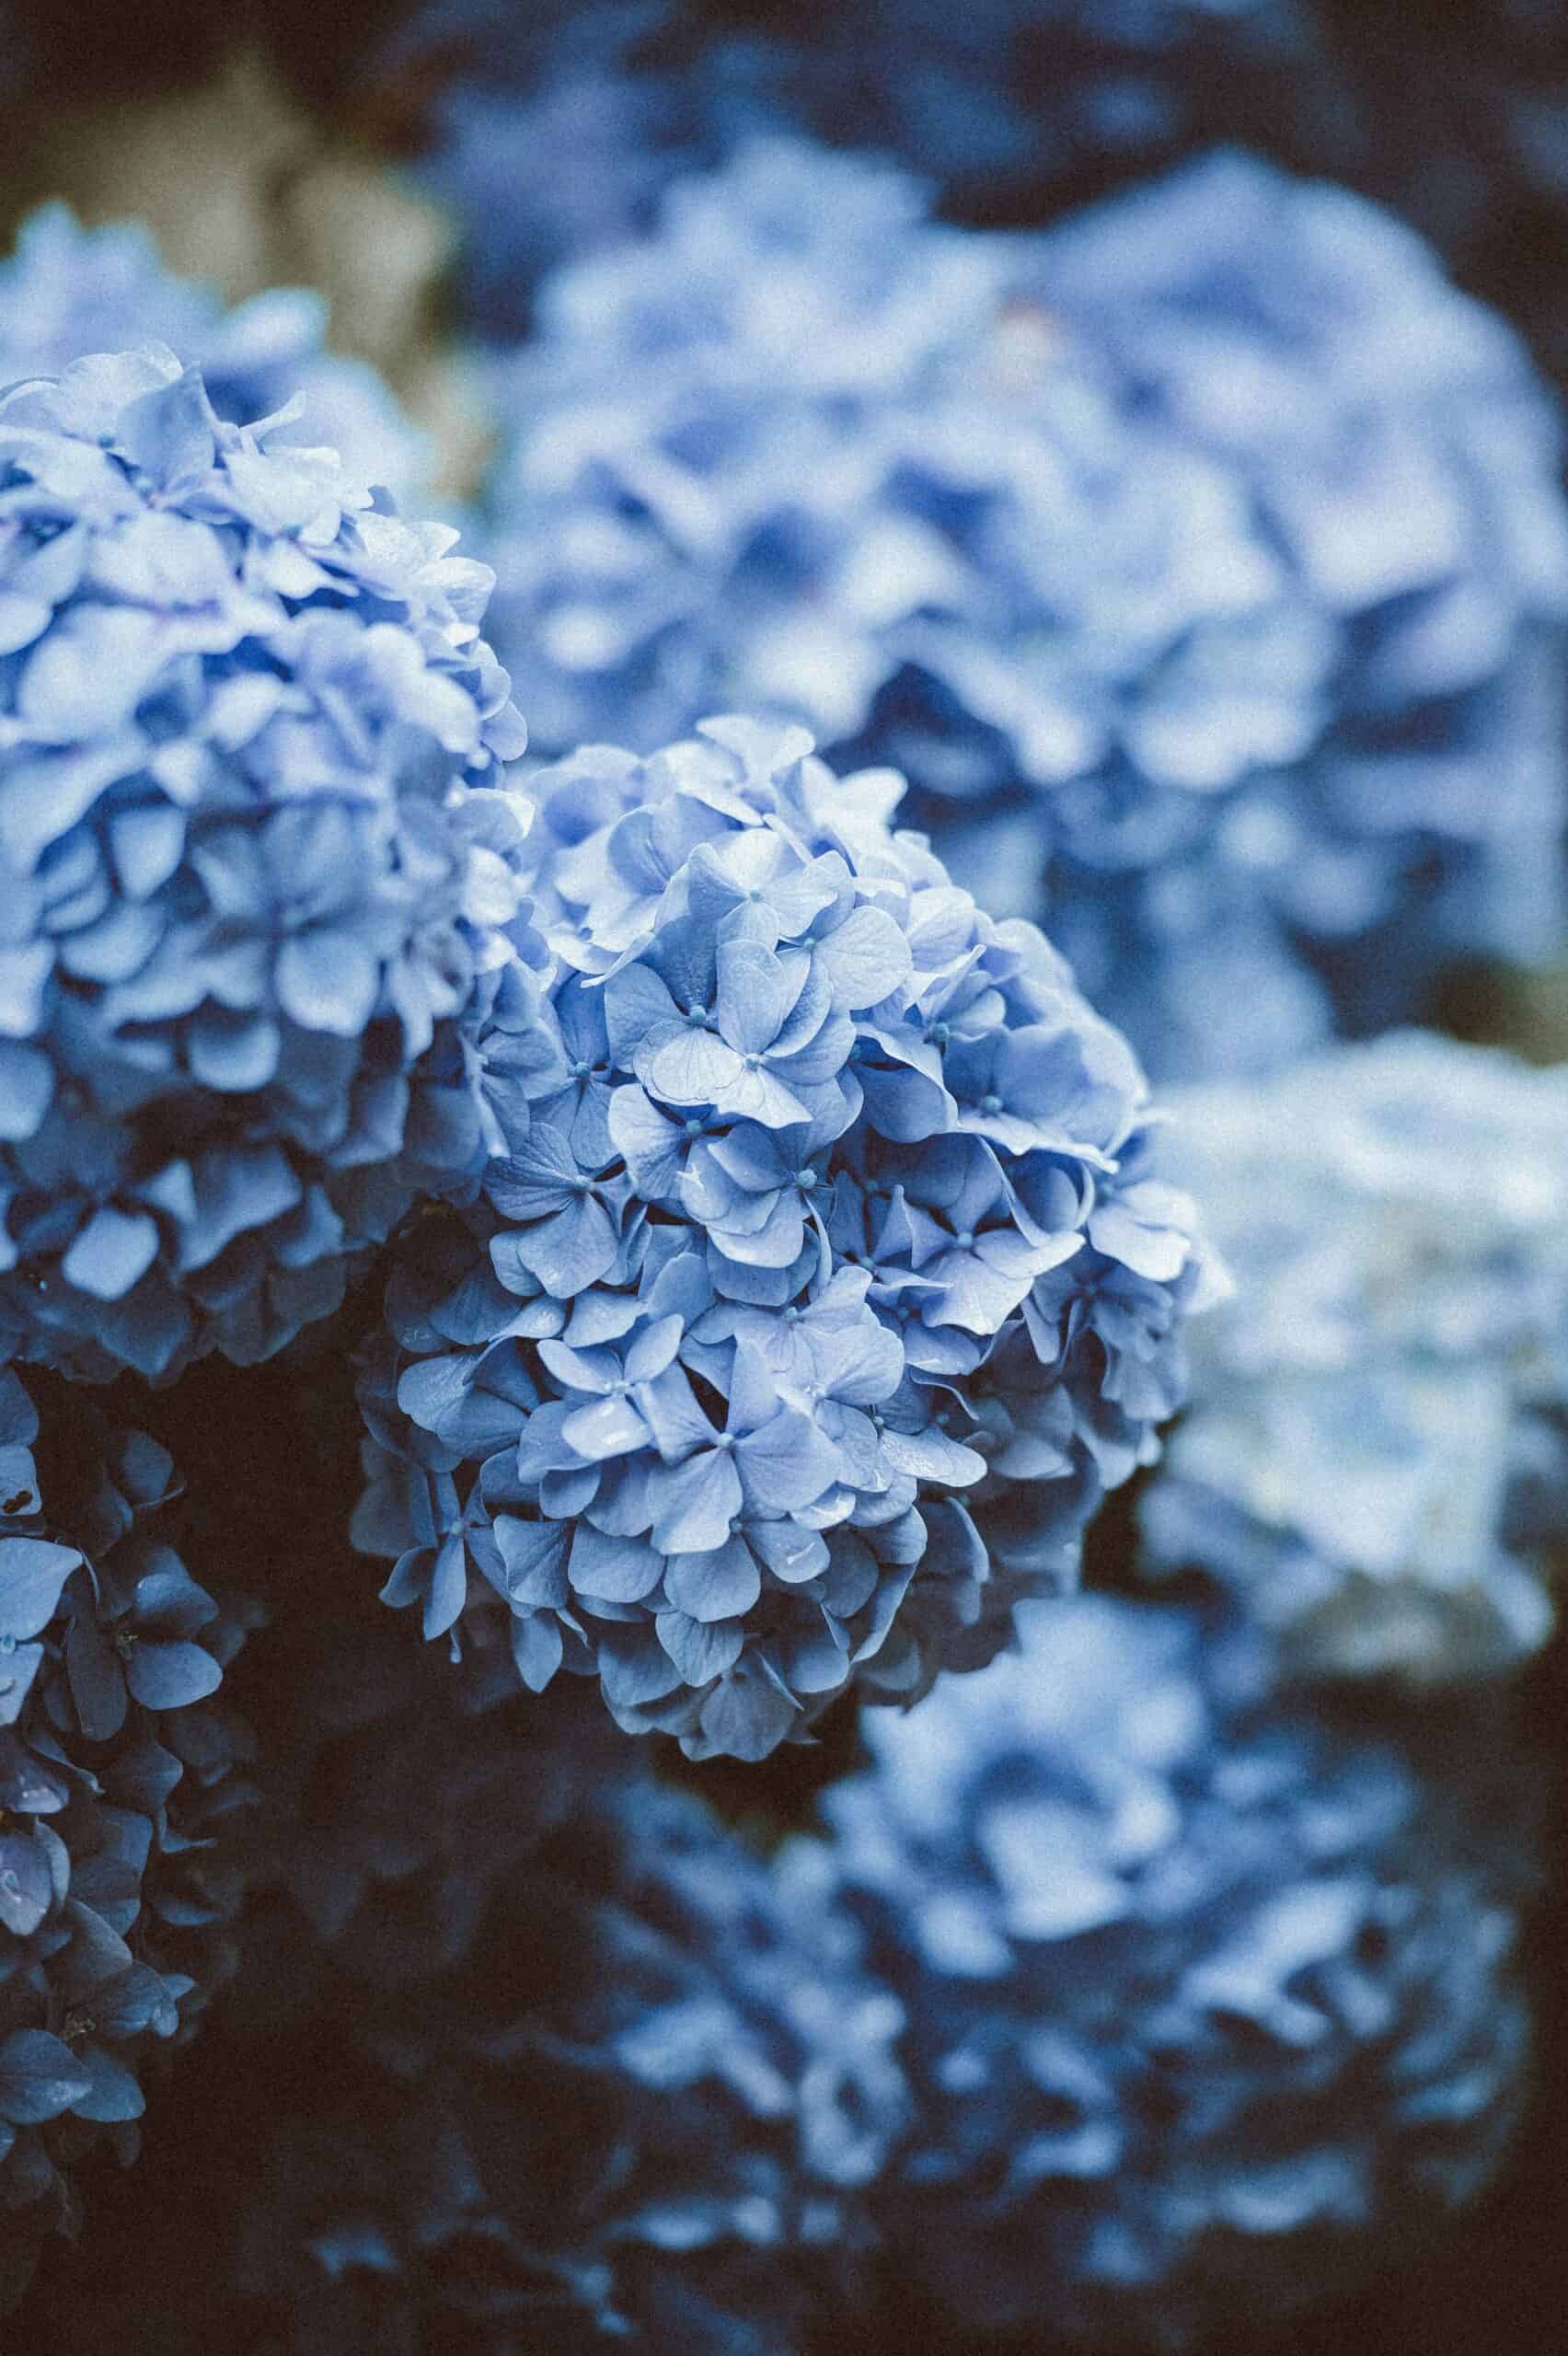 The 10 Most Popular Flowers in the World